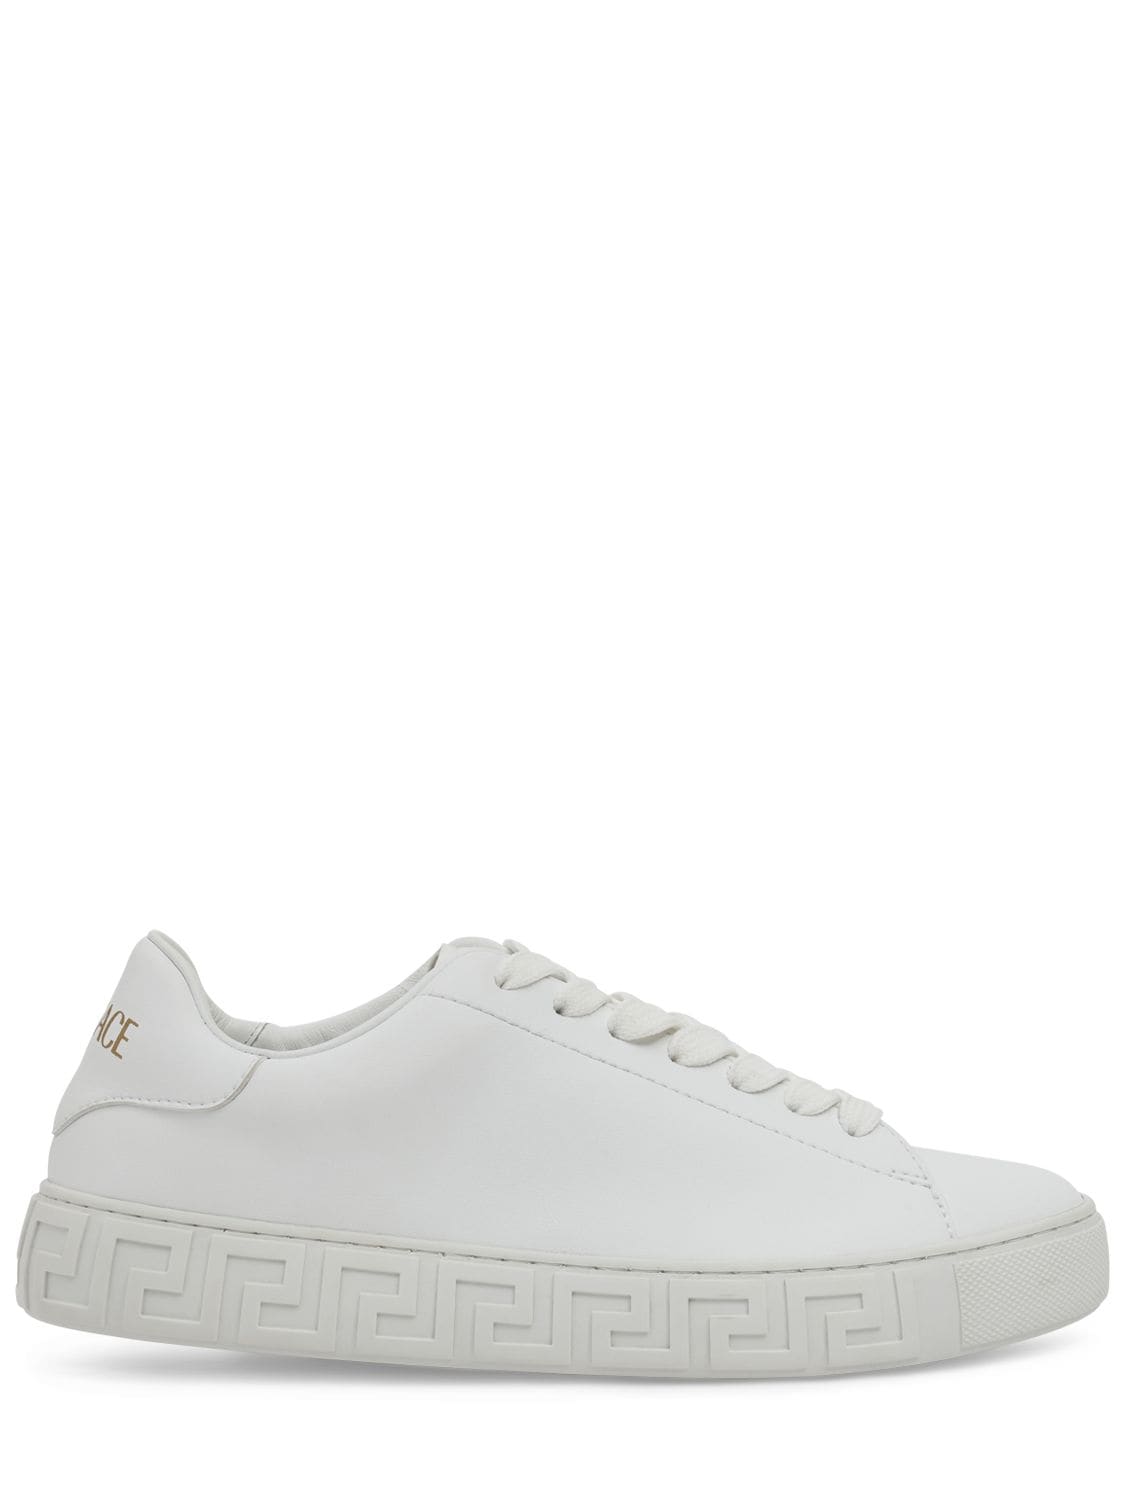 Versace Responsible Leather Sneakers In 1w010-white